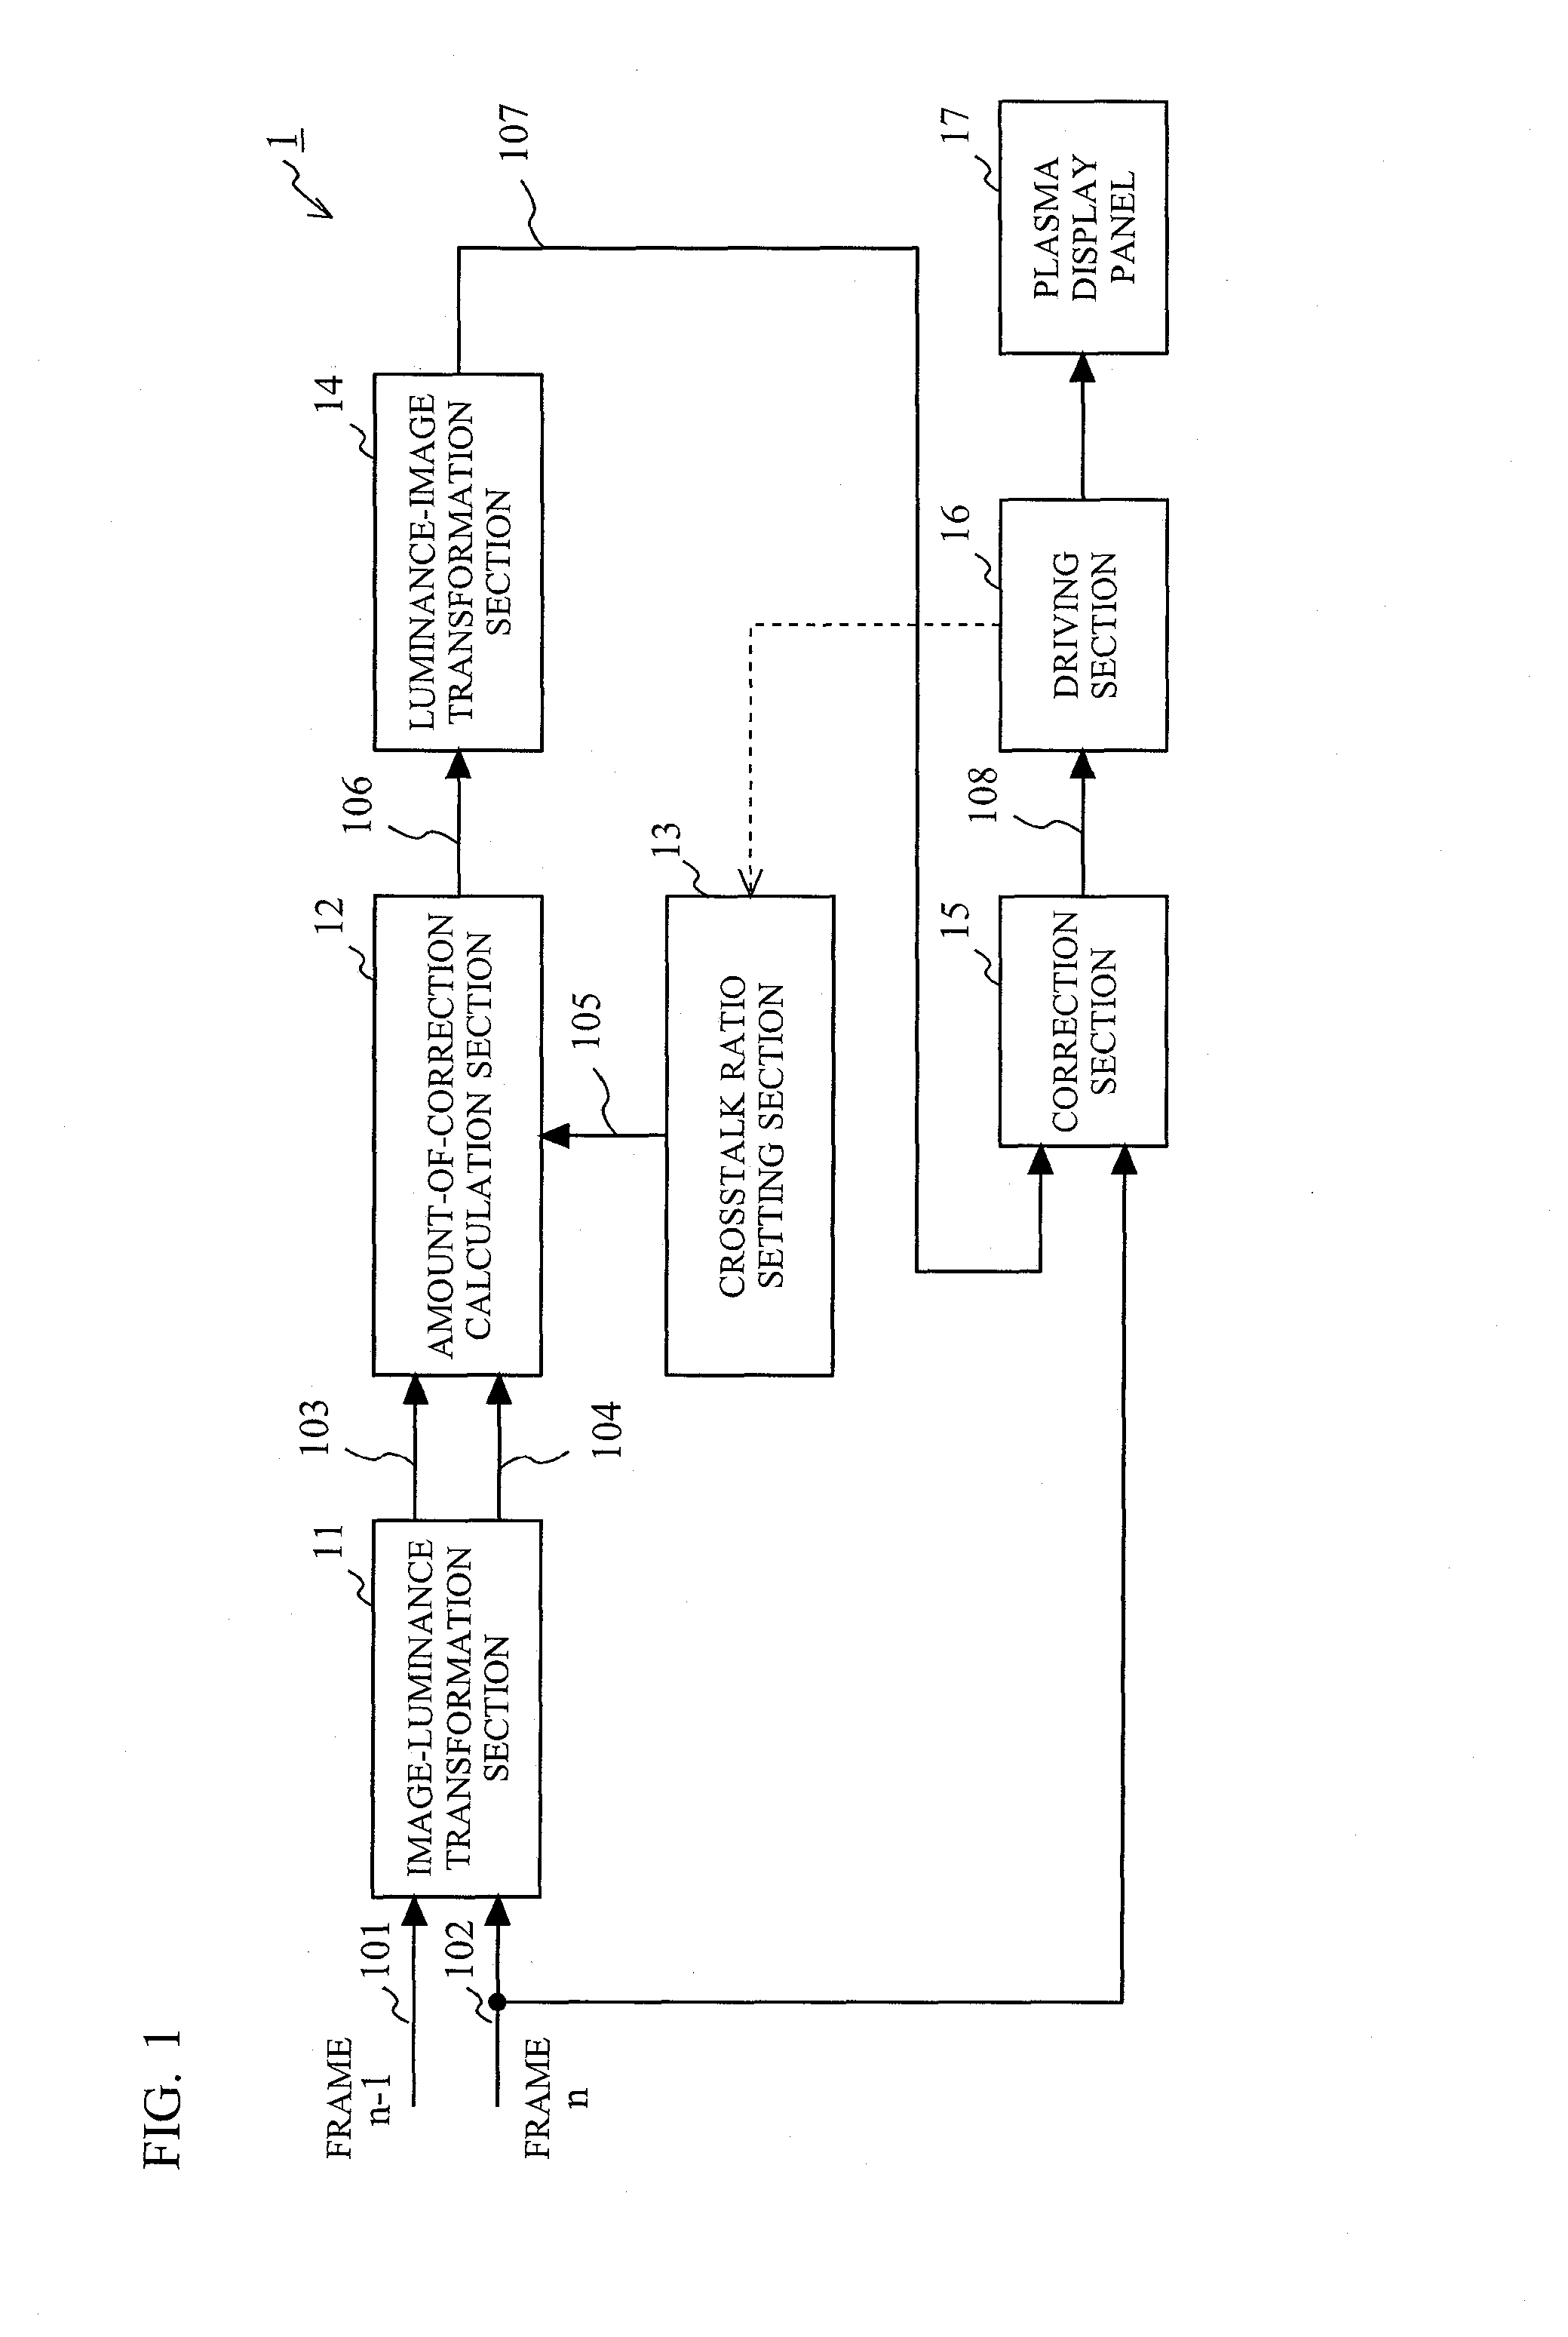 Video signal processing apparatus and video signal processing method